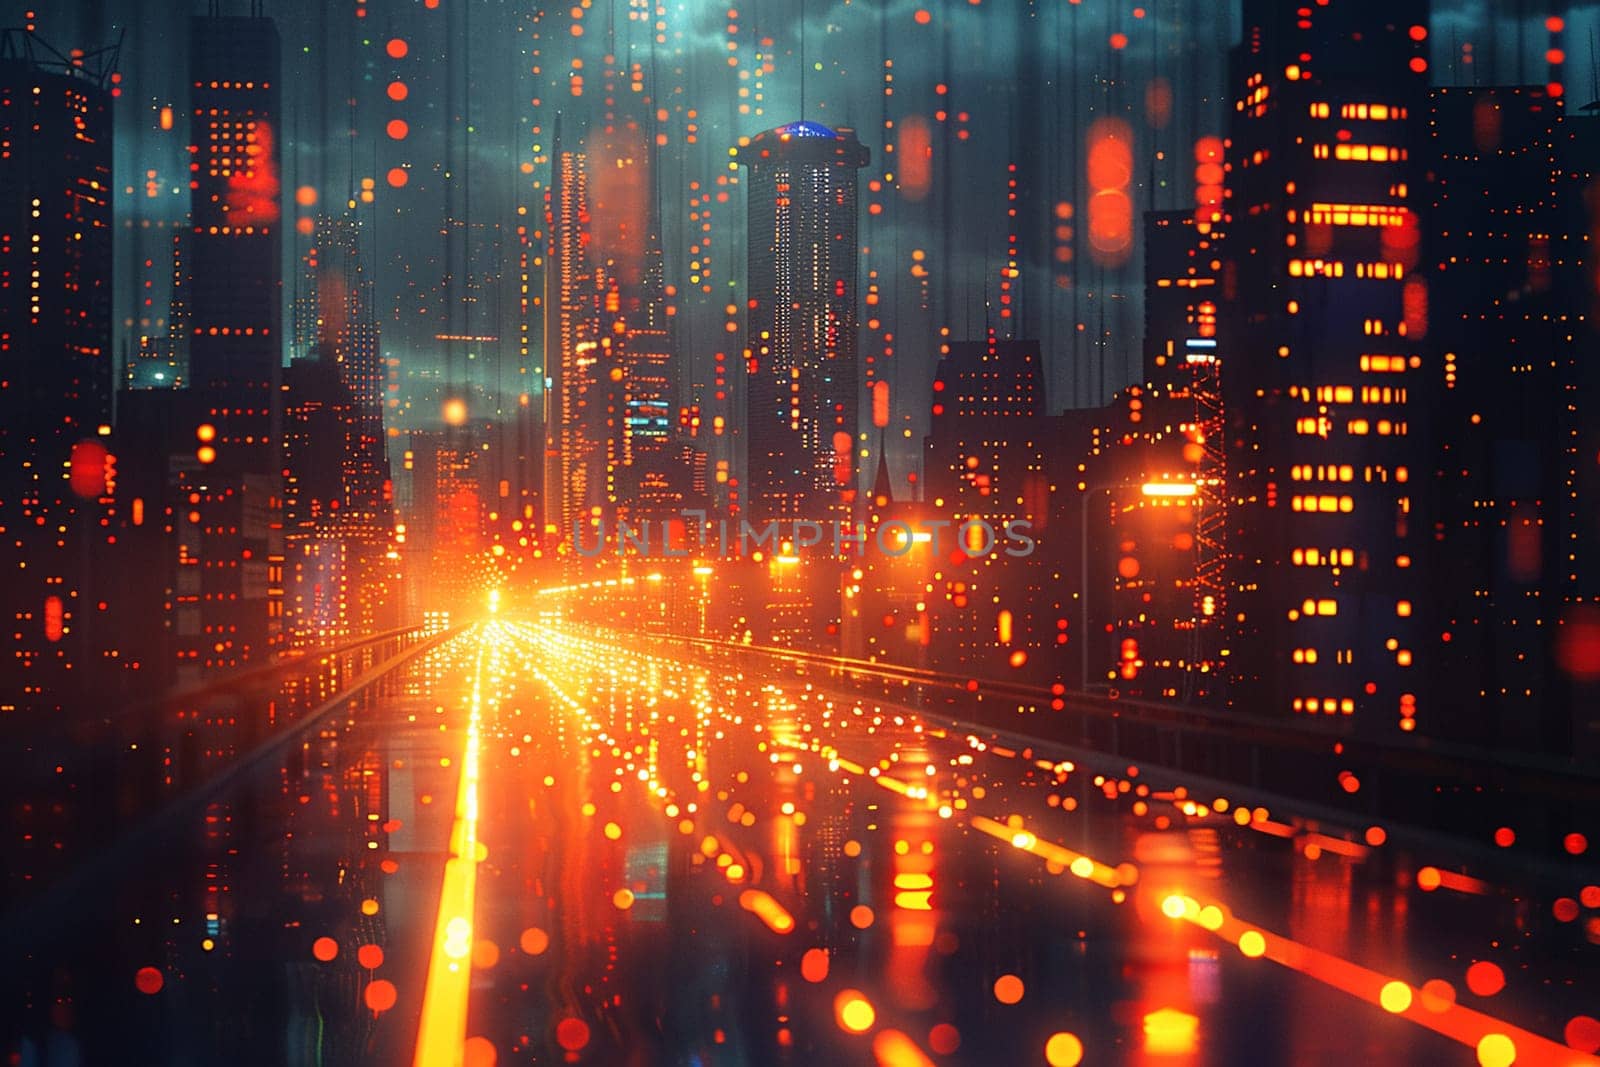 Futuristic City Map with Pixelated Traffic Flow, A digital grid blurs with moving dots, simulating the pulse of urban movement.